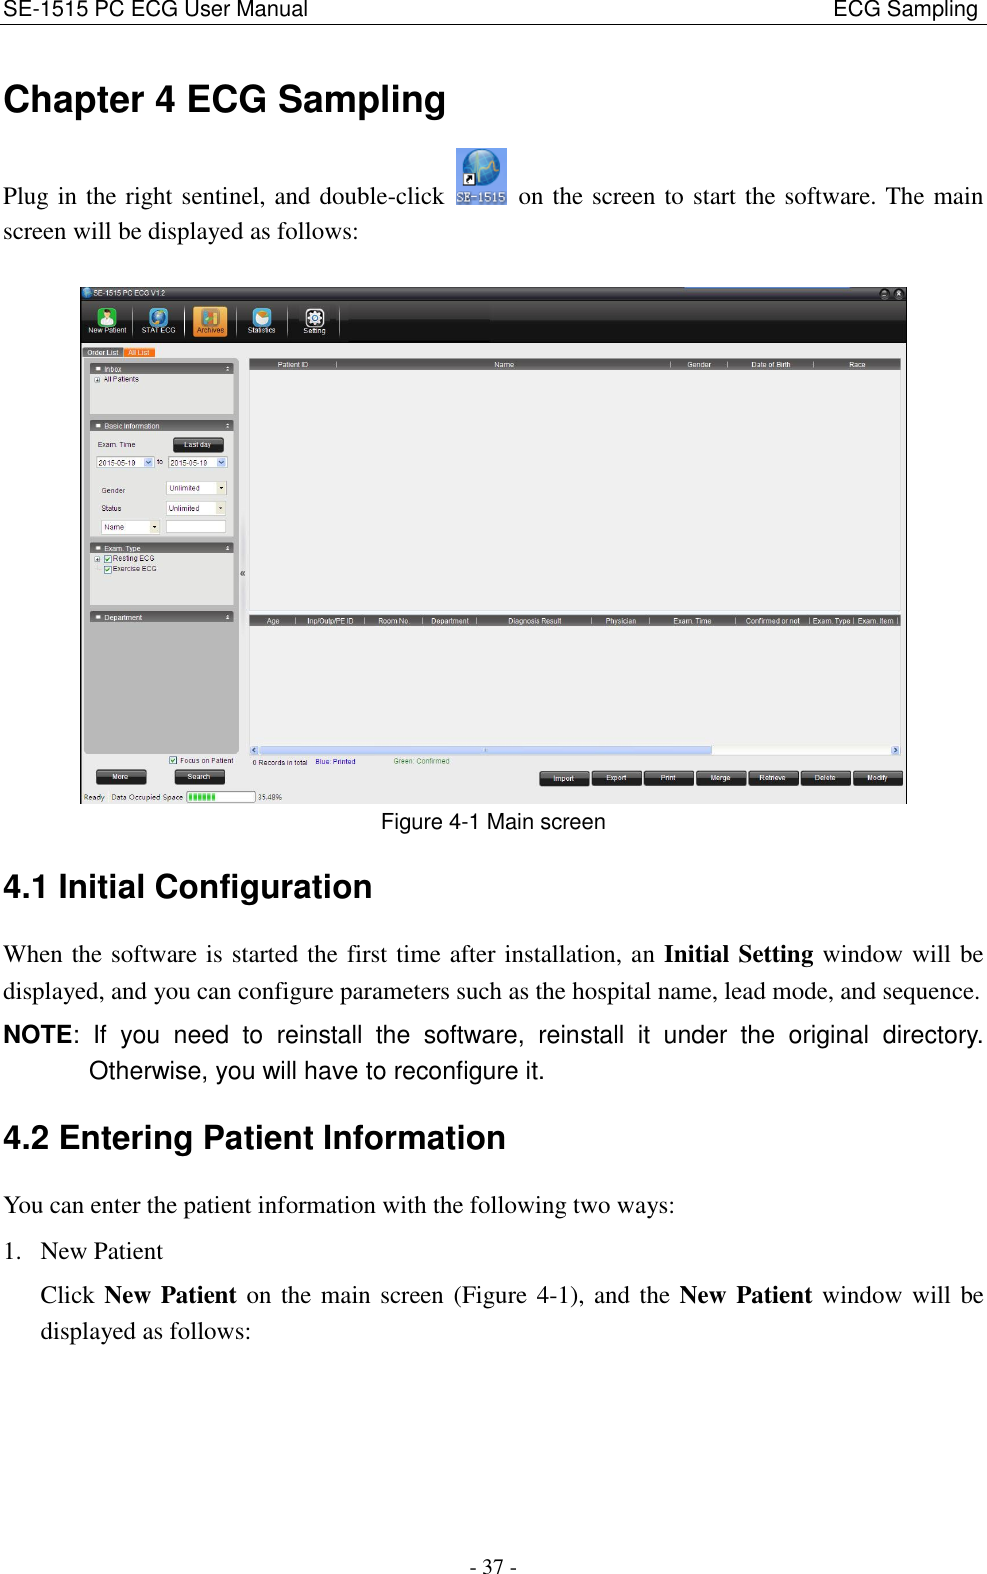 SE-1515 PC ECG User Manual                                                                                              ECG Sampling - 37 - Chapter 4 ECG Sampling Plug in the right sentinel, and double-click    on the screen to start the software. The main screen will be displayed as follows:   Figure 4-1 Main screen 4.1 Initial Configuration When the software is started the first time after installation, an Initial Setting window will be displayed, and you can configure parameters such as the hospital name, lead mode, and sequence. NOTE:  If  you  need  to  reinstall  the  software,  reinstall  it  under  the  original  directory. Otherwise, you will have to reconfigure it. 4.2 Entering Patient Information You can enter the patient information with the following two ways: 1. New Patient Click New Patient on the main screen (Figure 4-1), and the New Patient window will be displayed as follows: 